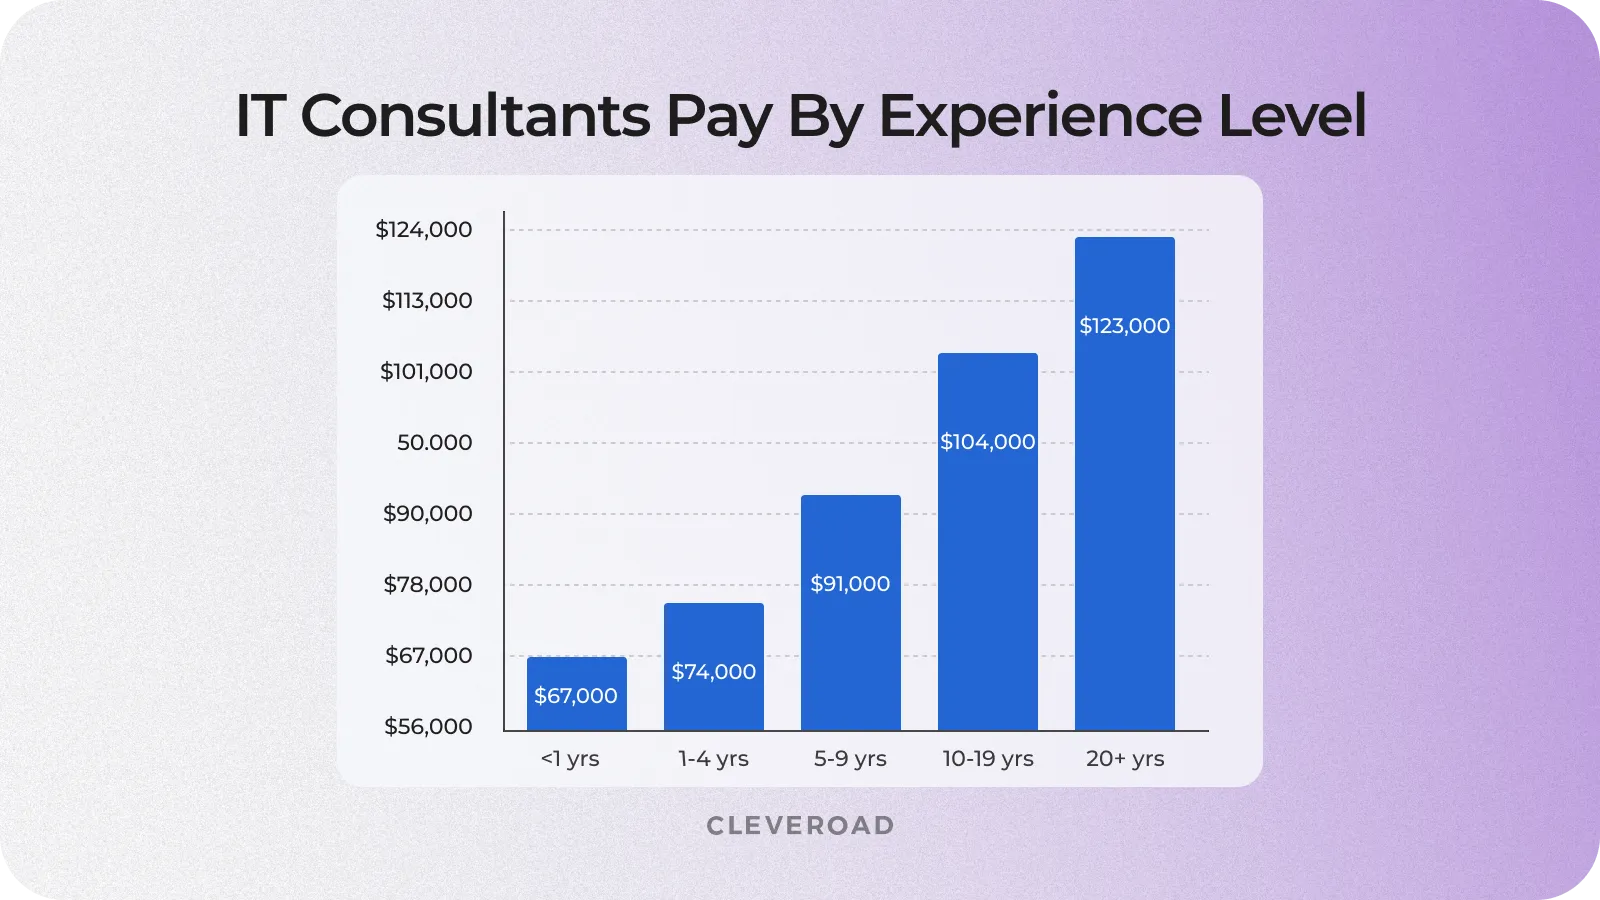 IT consultants' fee by experience level